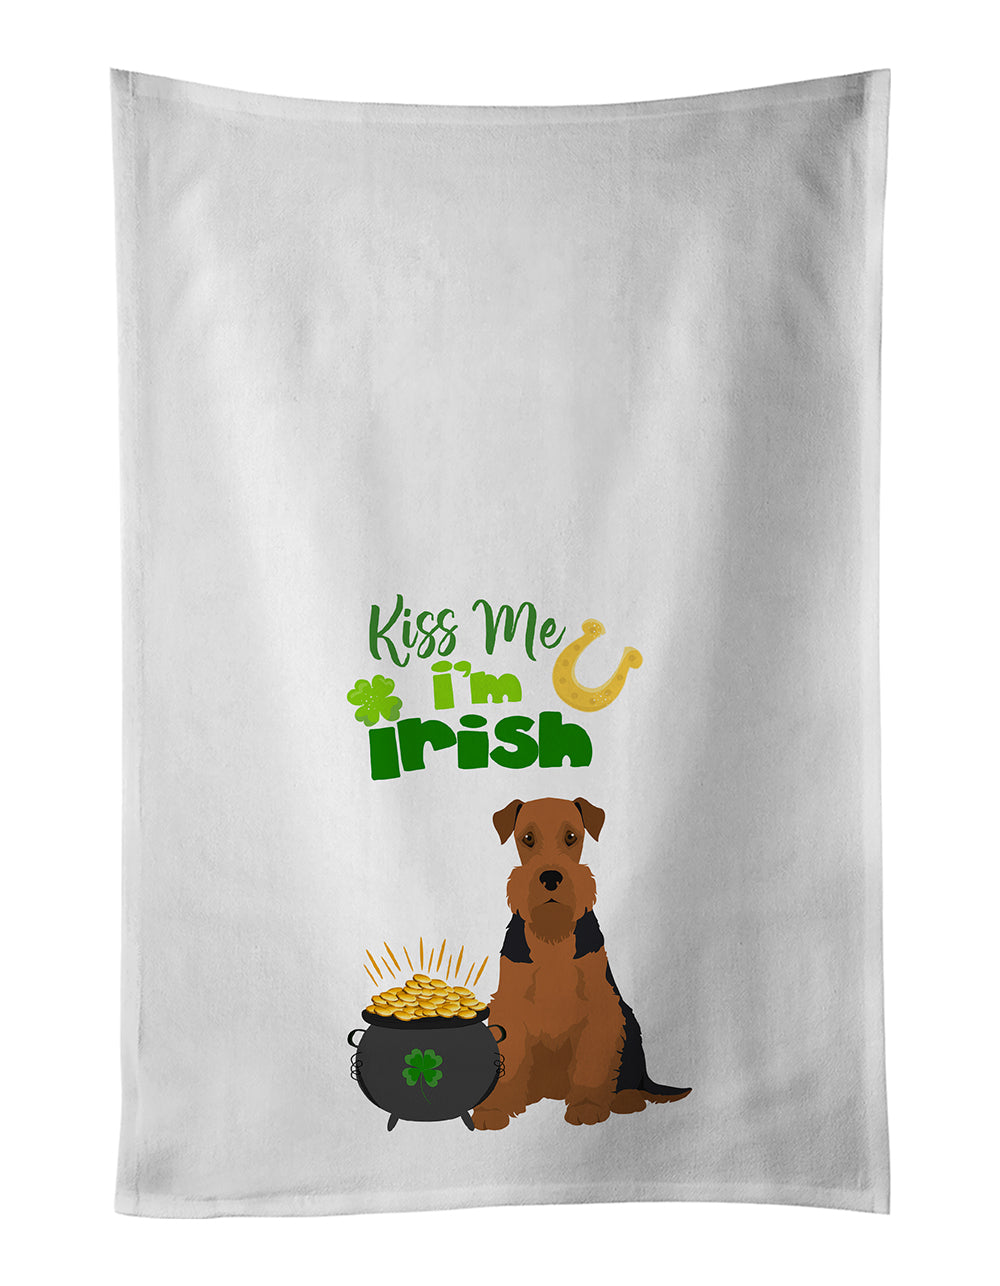 Buy this Black and Tan Airedale Terrier St. Patrick's Day White Kitchen Towel Set of 2 Dish Towels